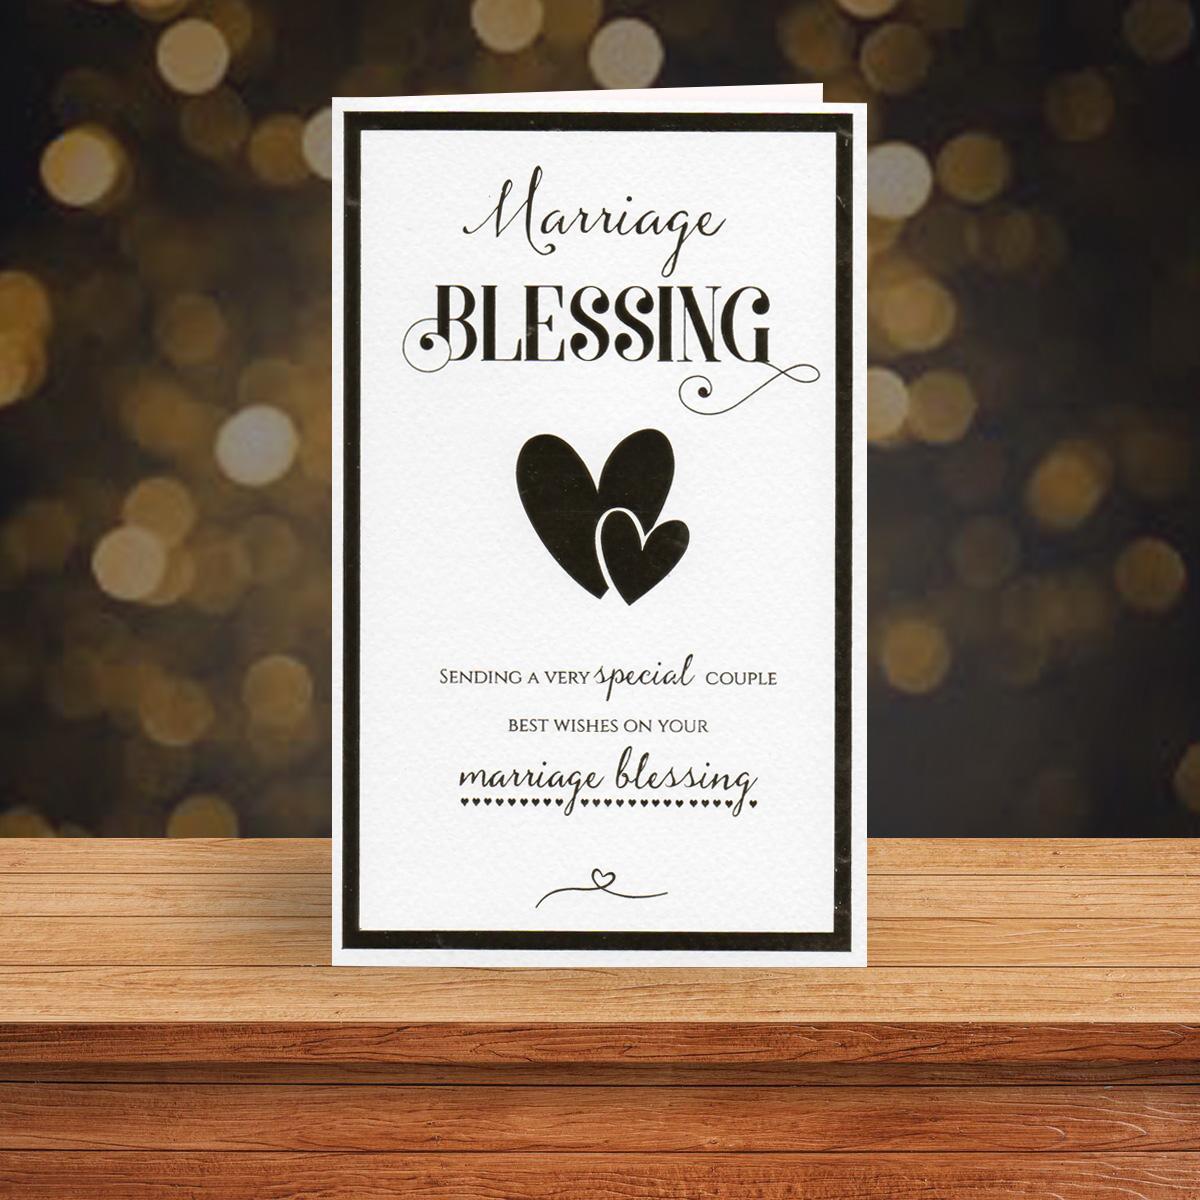 A Selection Of Cards To Show The Depth Of Range In Our Wedding Blessing Cards Section